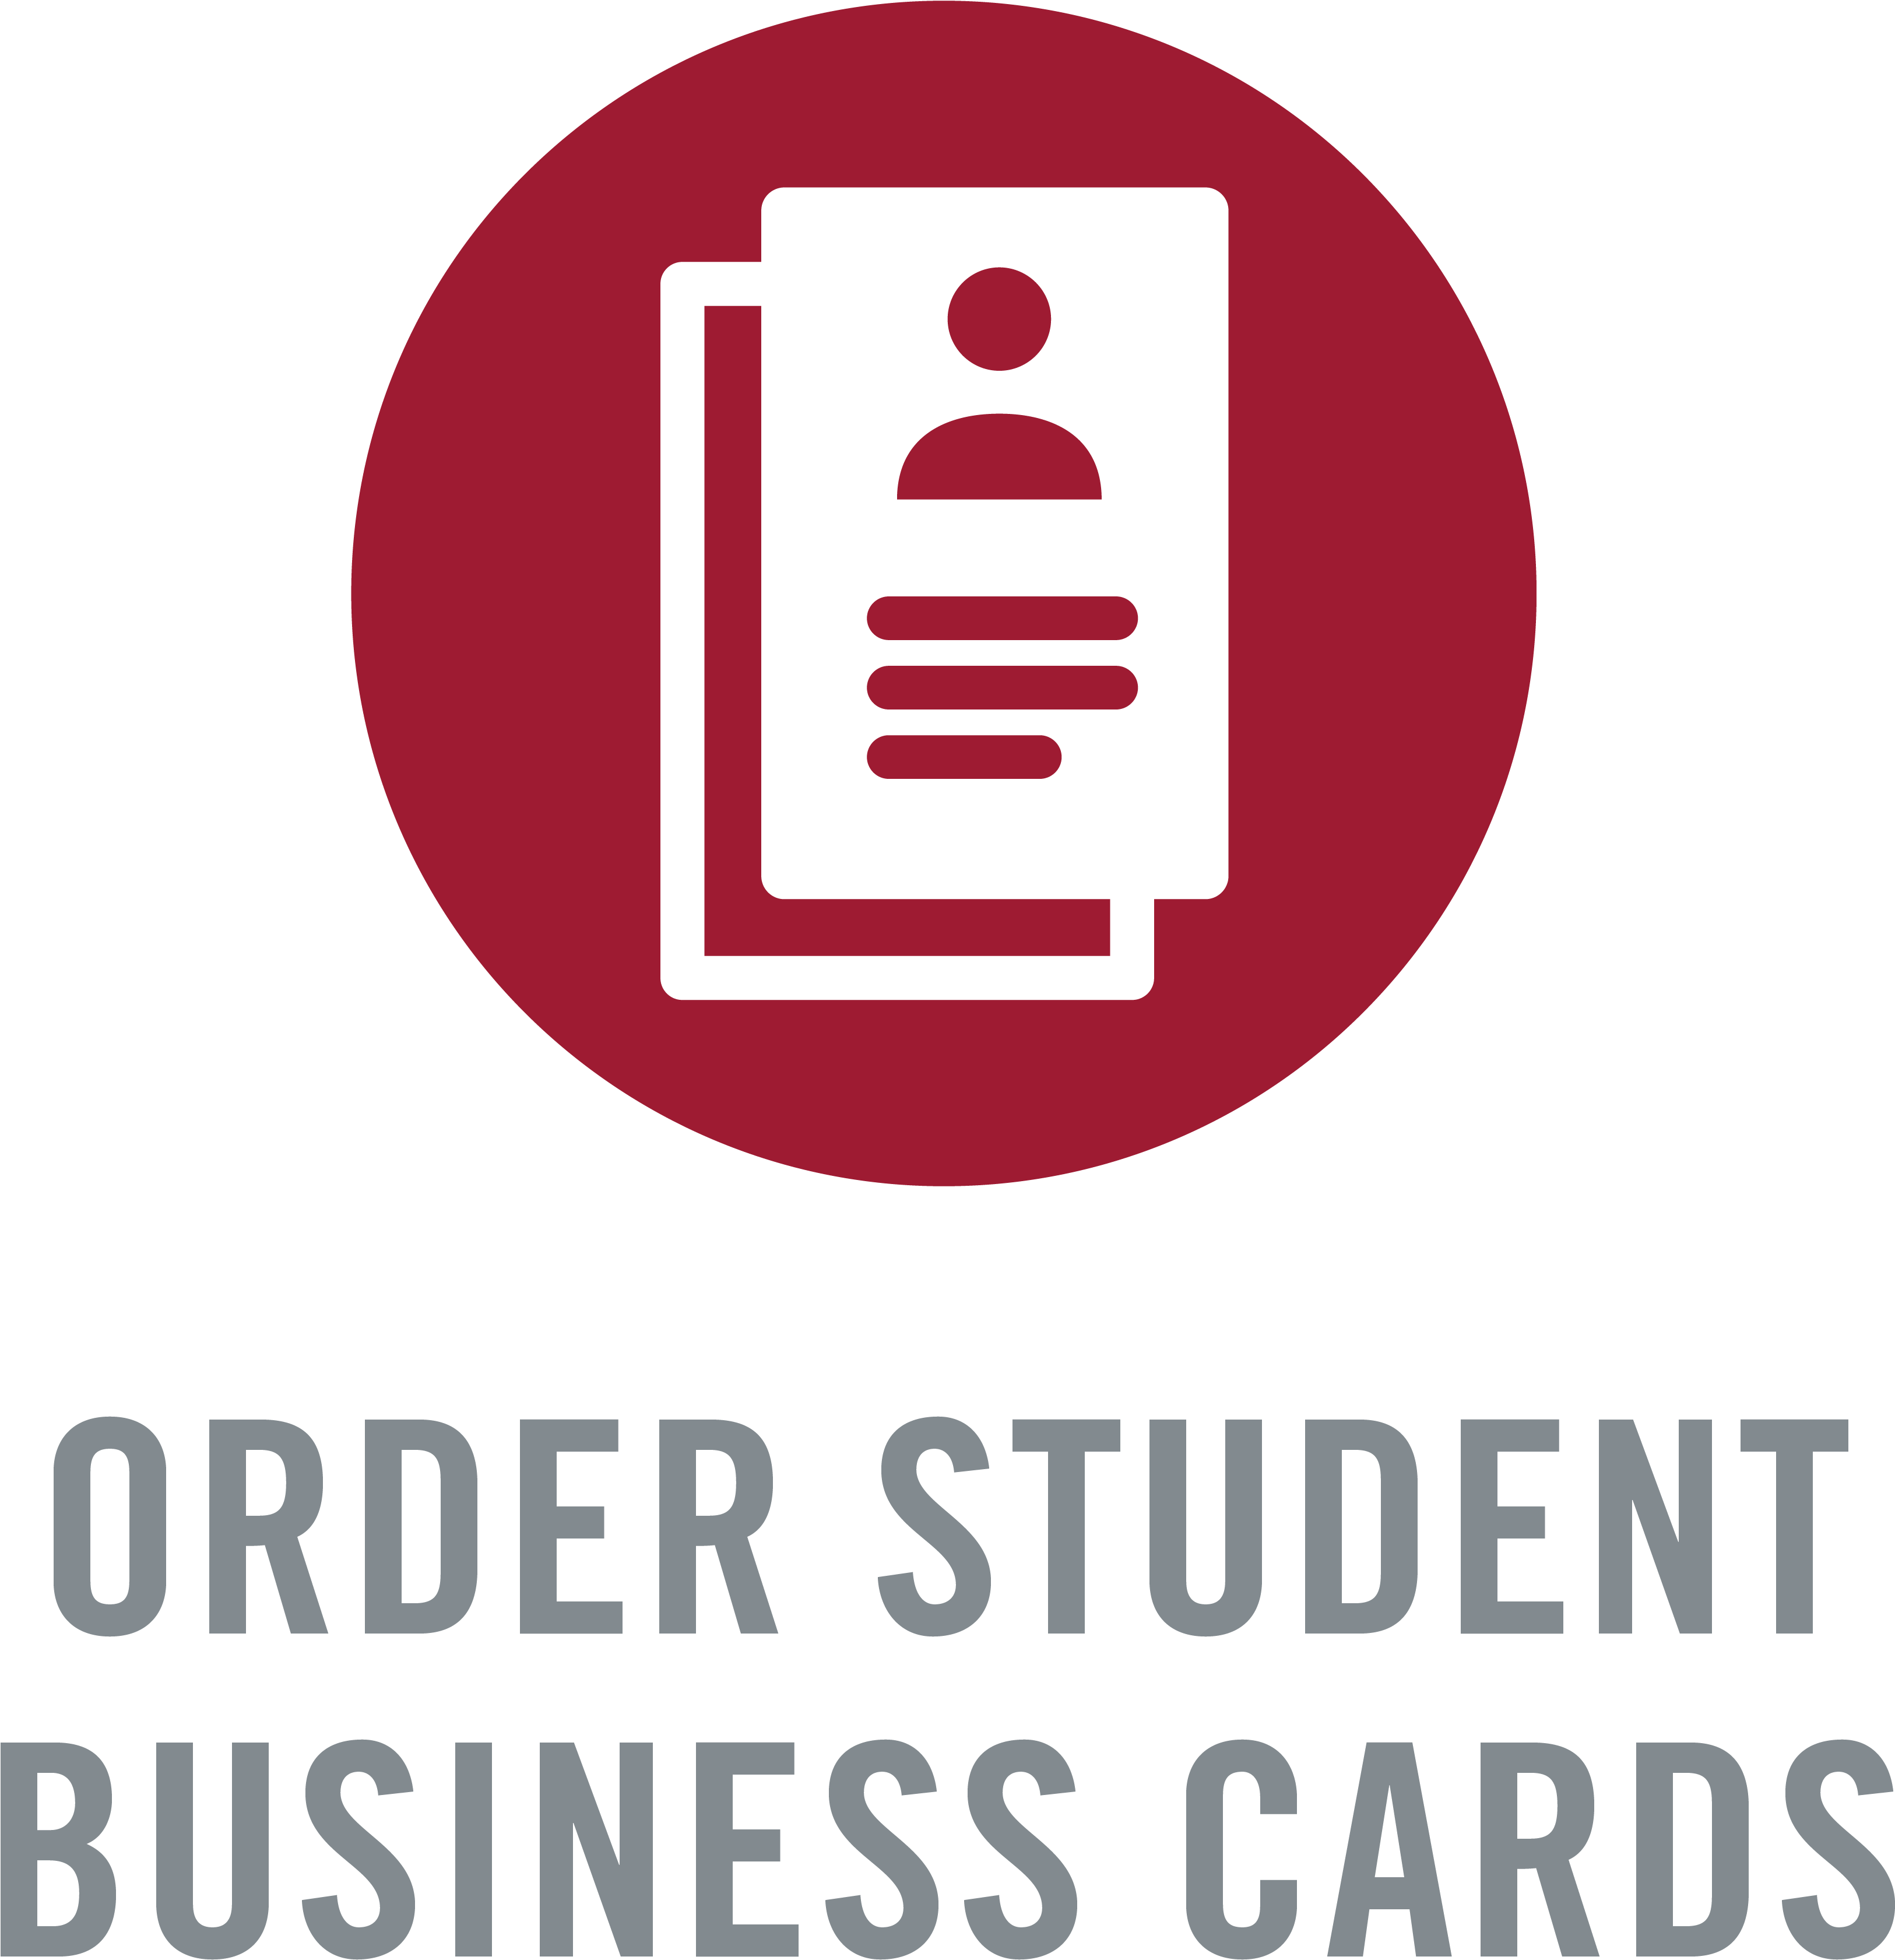 Copier Toner, Student Business Cards - Drop Off And Pick Up Sign (4167x4167)